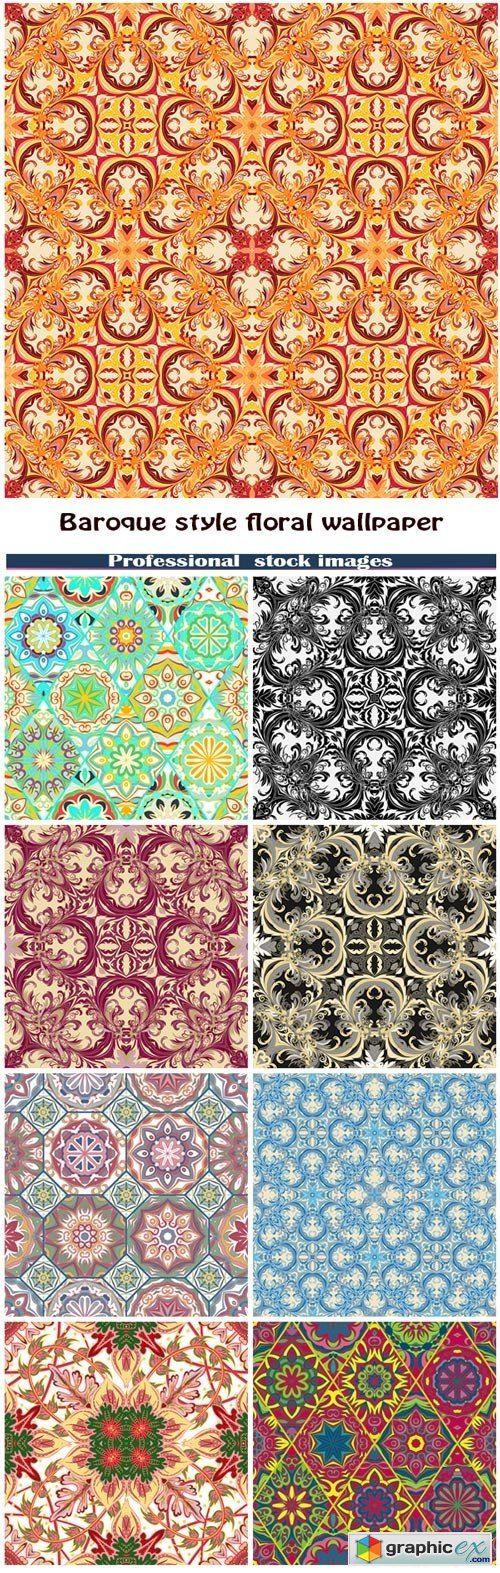 Baroque style floral wallpaper